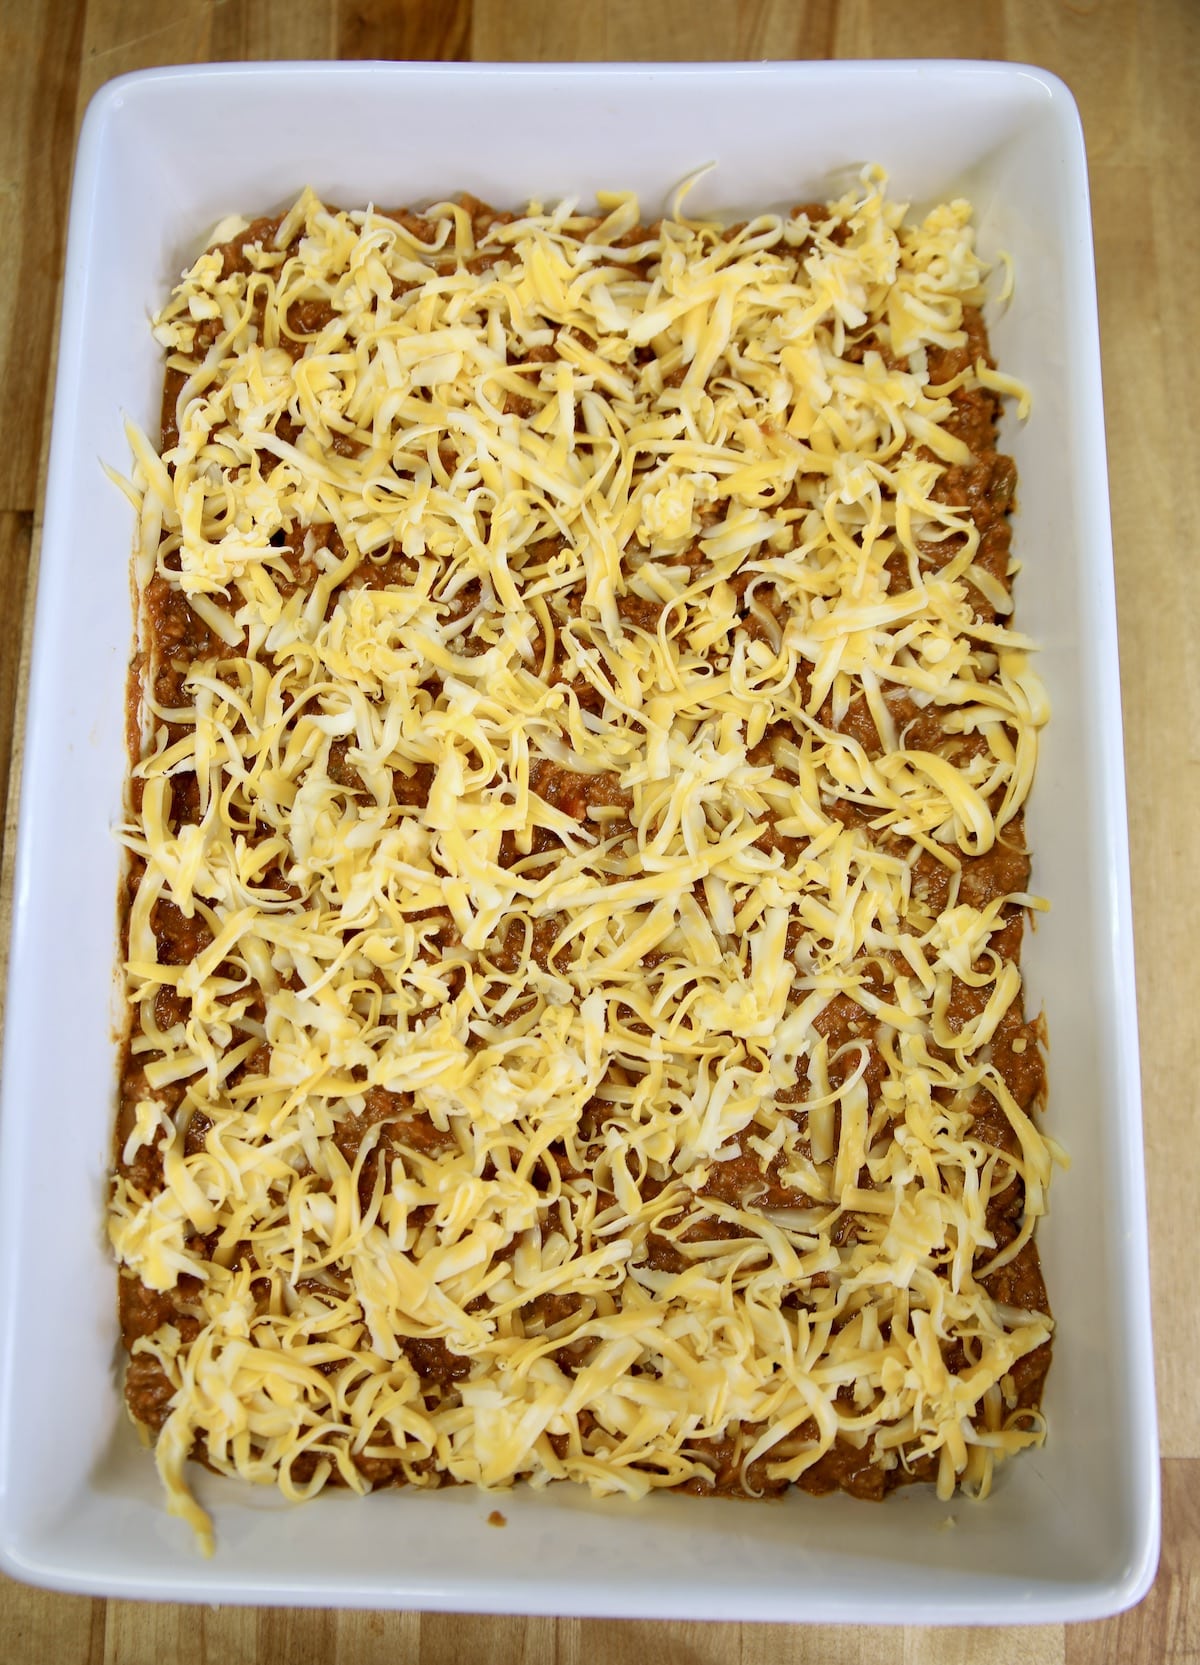 Ground beef and bean burrito casserole with shredded cheese -unbaked.